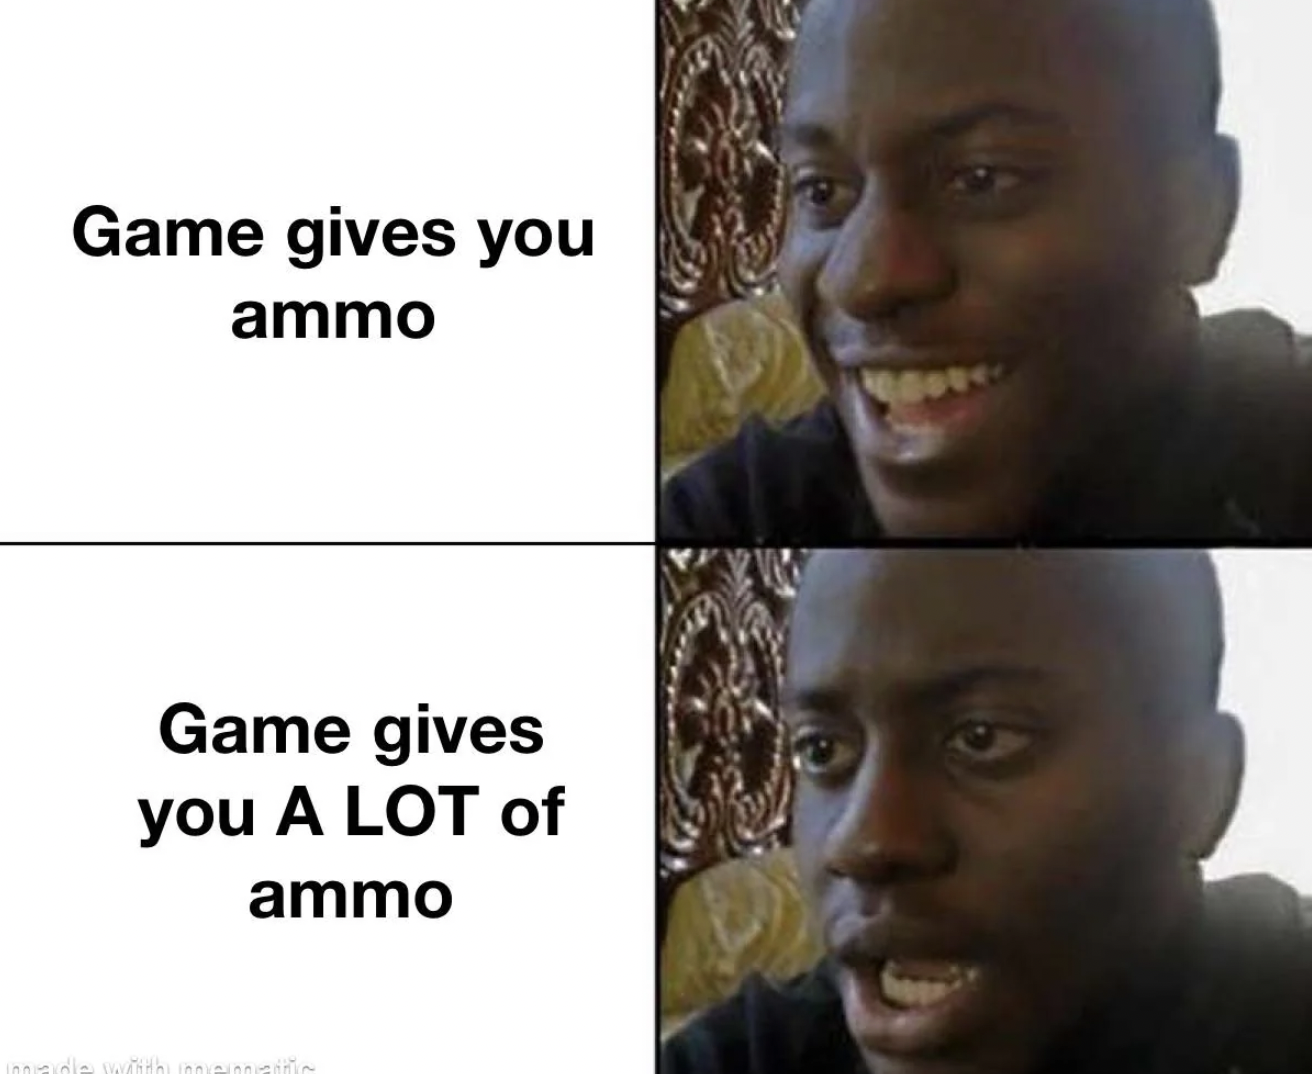 smile - Game gives you ammo Game gives you A Lot of ammo